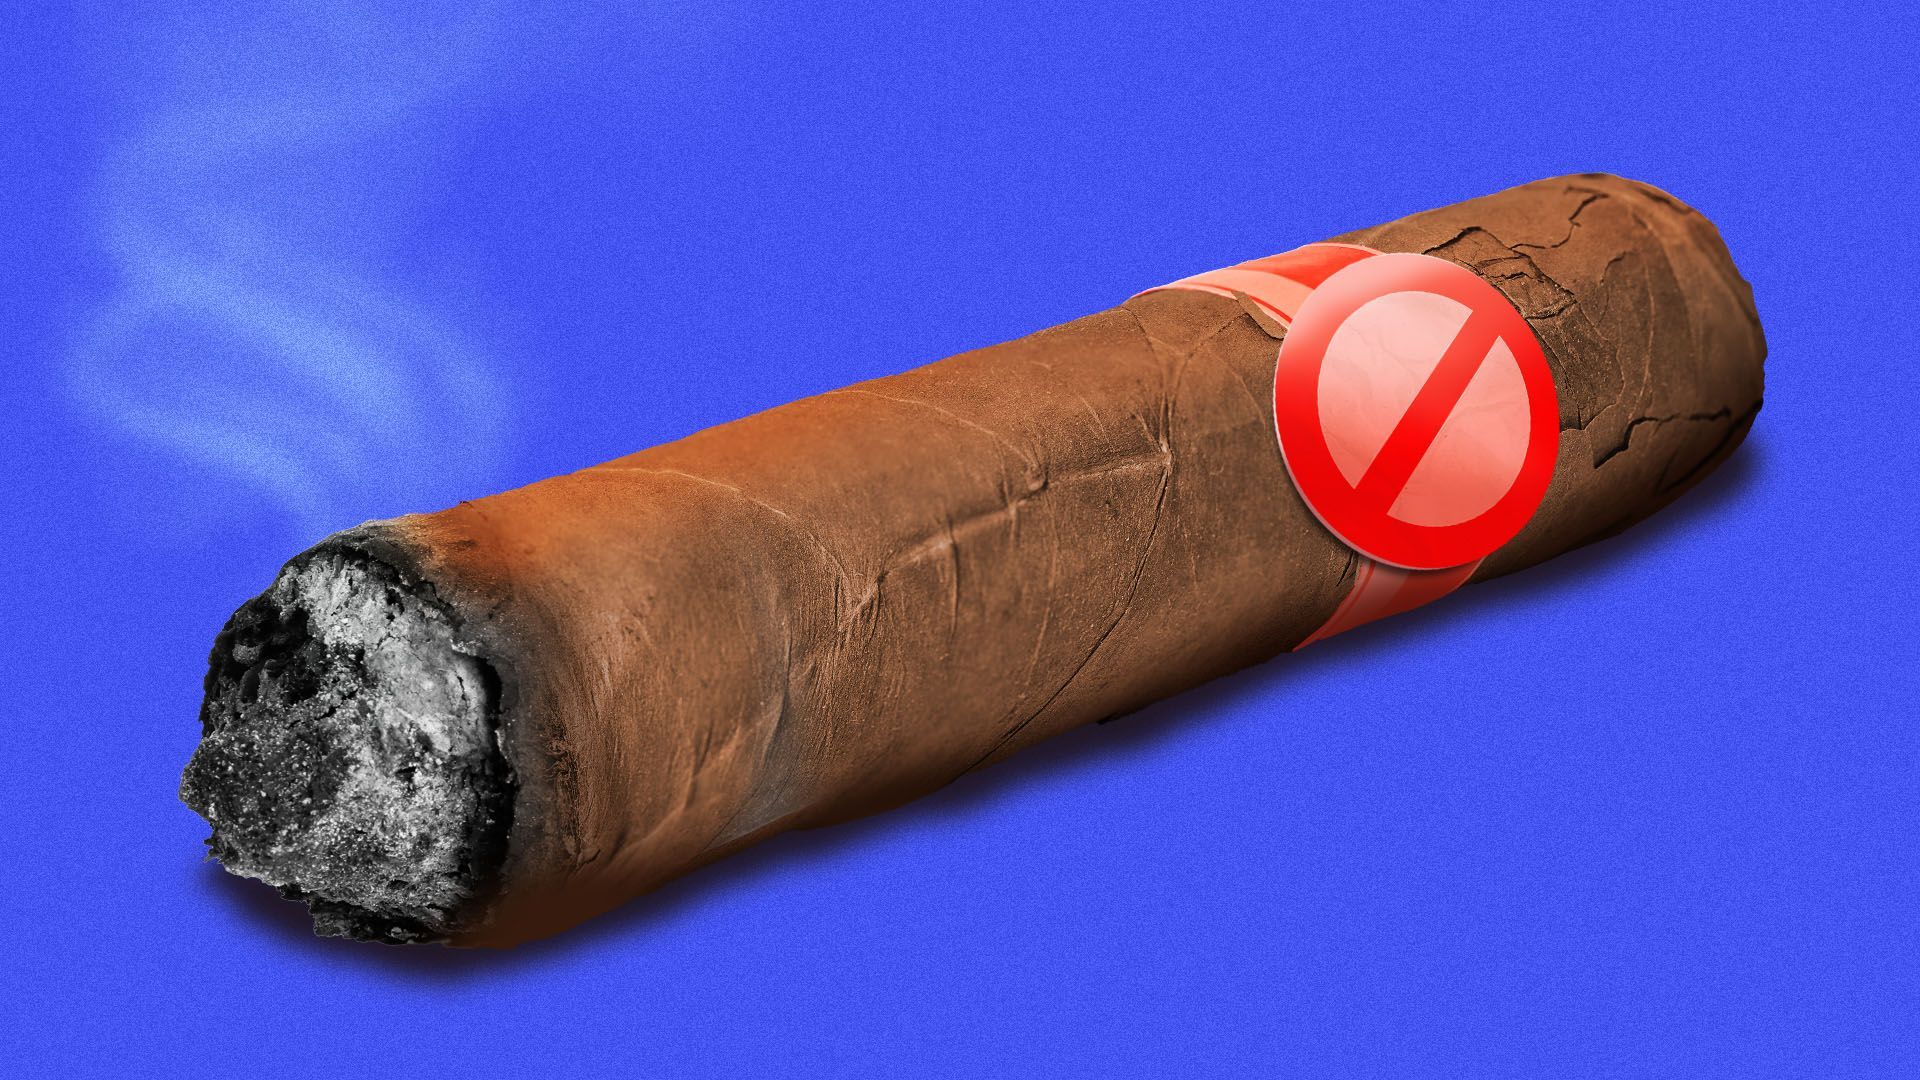 Illustration of a lit cigar with a "no" symbol on the label